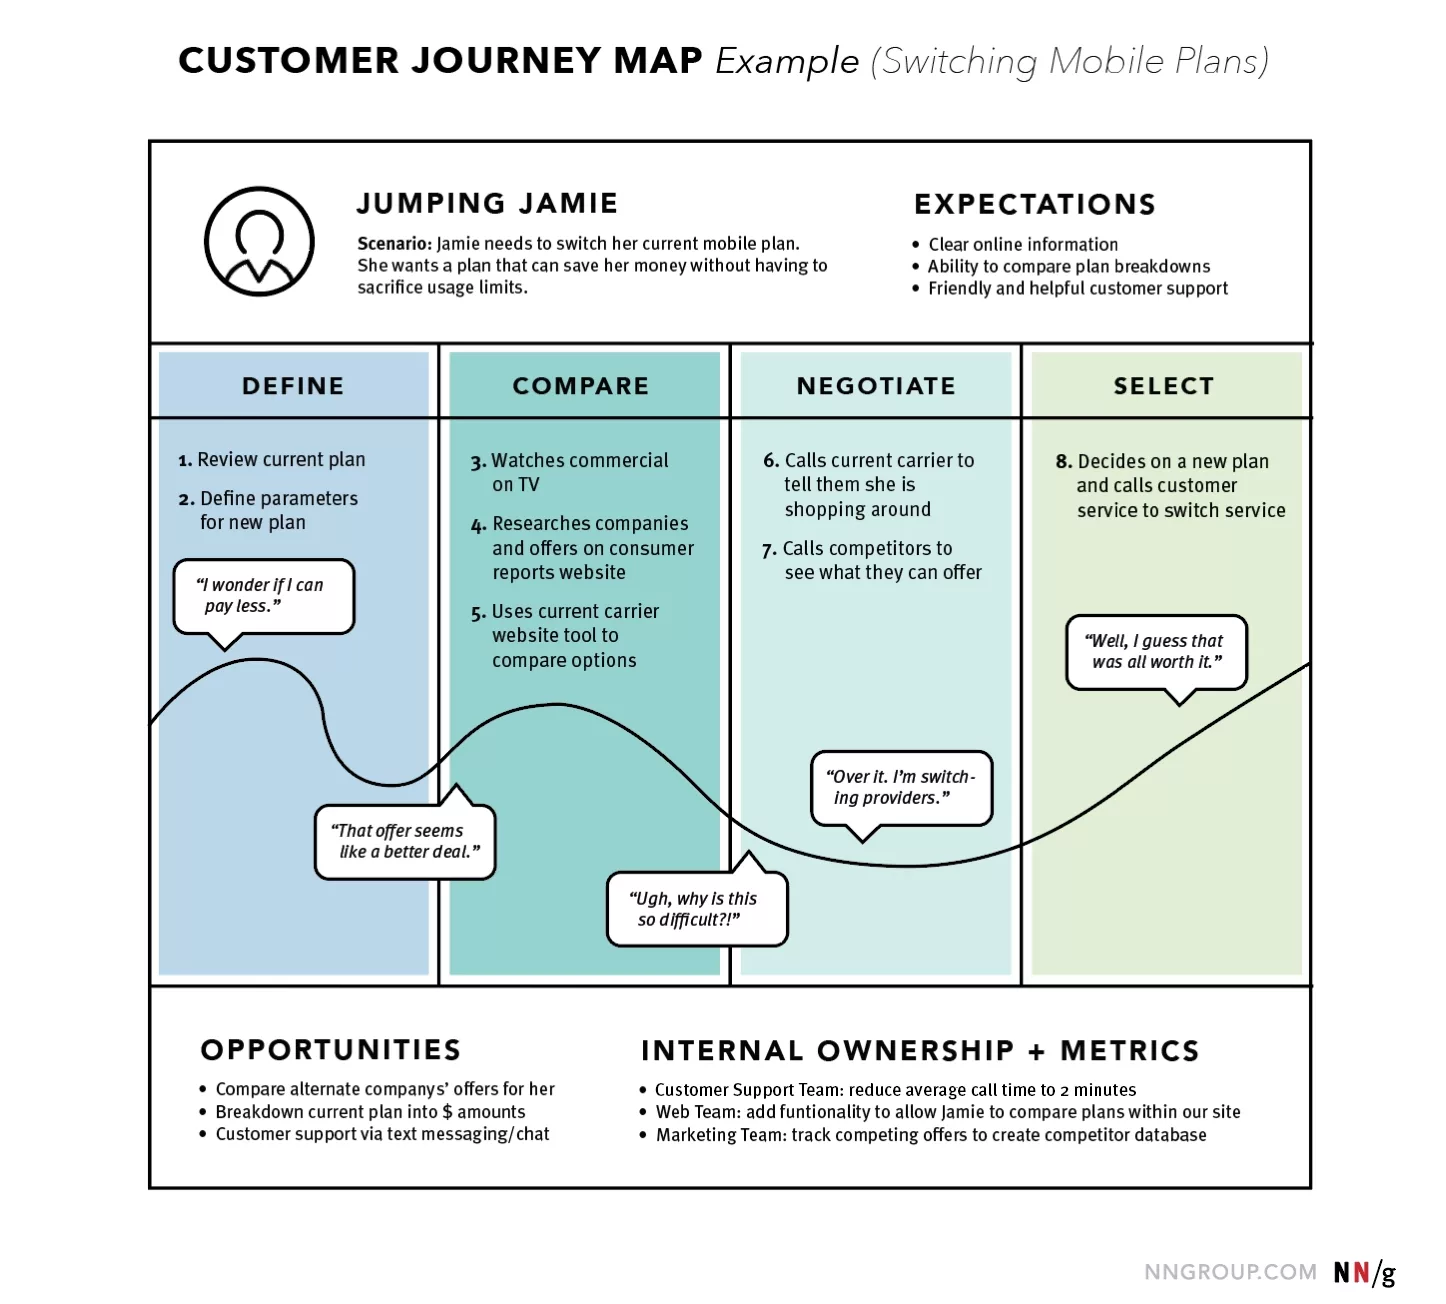 <em>An example of a simplistic, high-level customer-journey map depicting how the persona “Jumping Jamie” switches her mobile plan.</em>